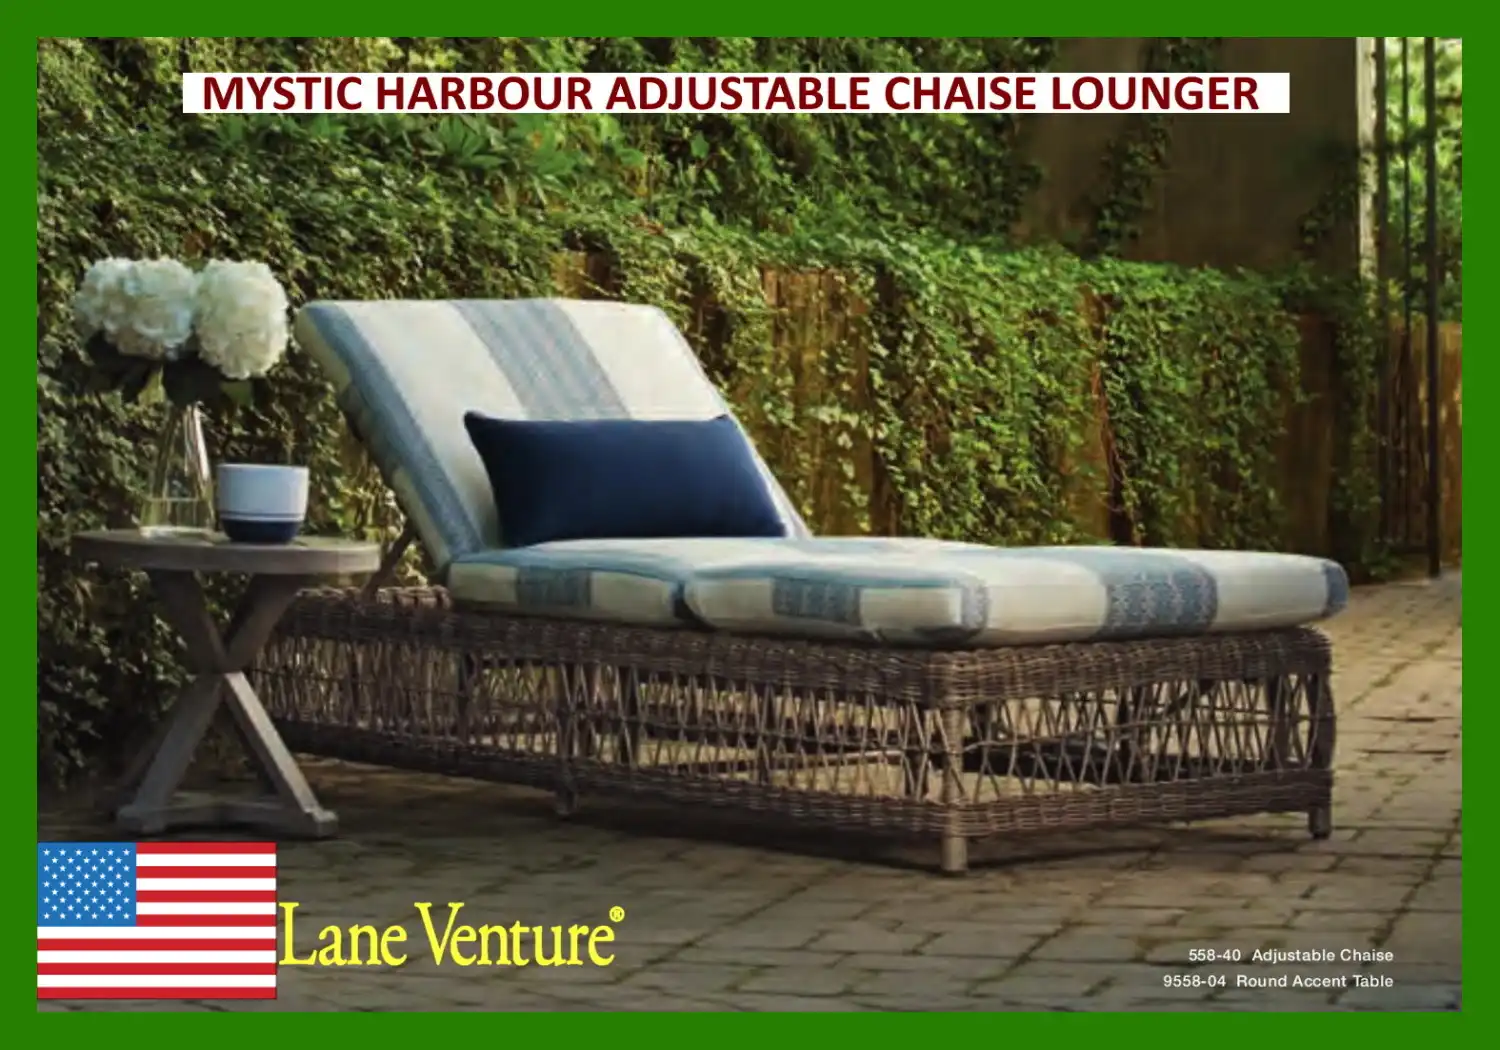 MYSTIC HARBOUR ADJUSTABLE CHAISE LOUNGER